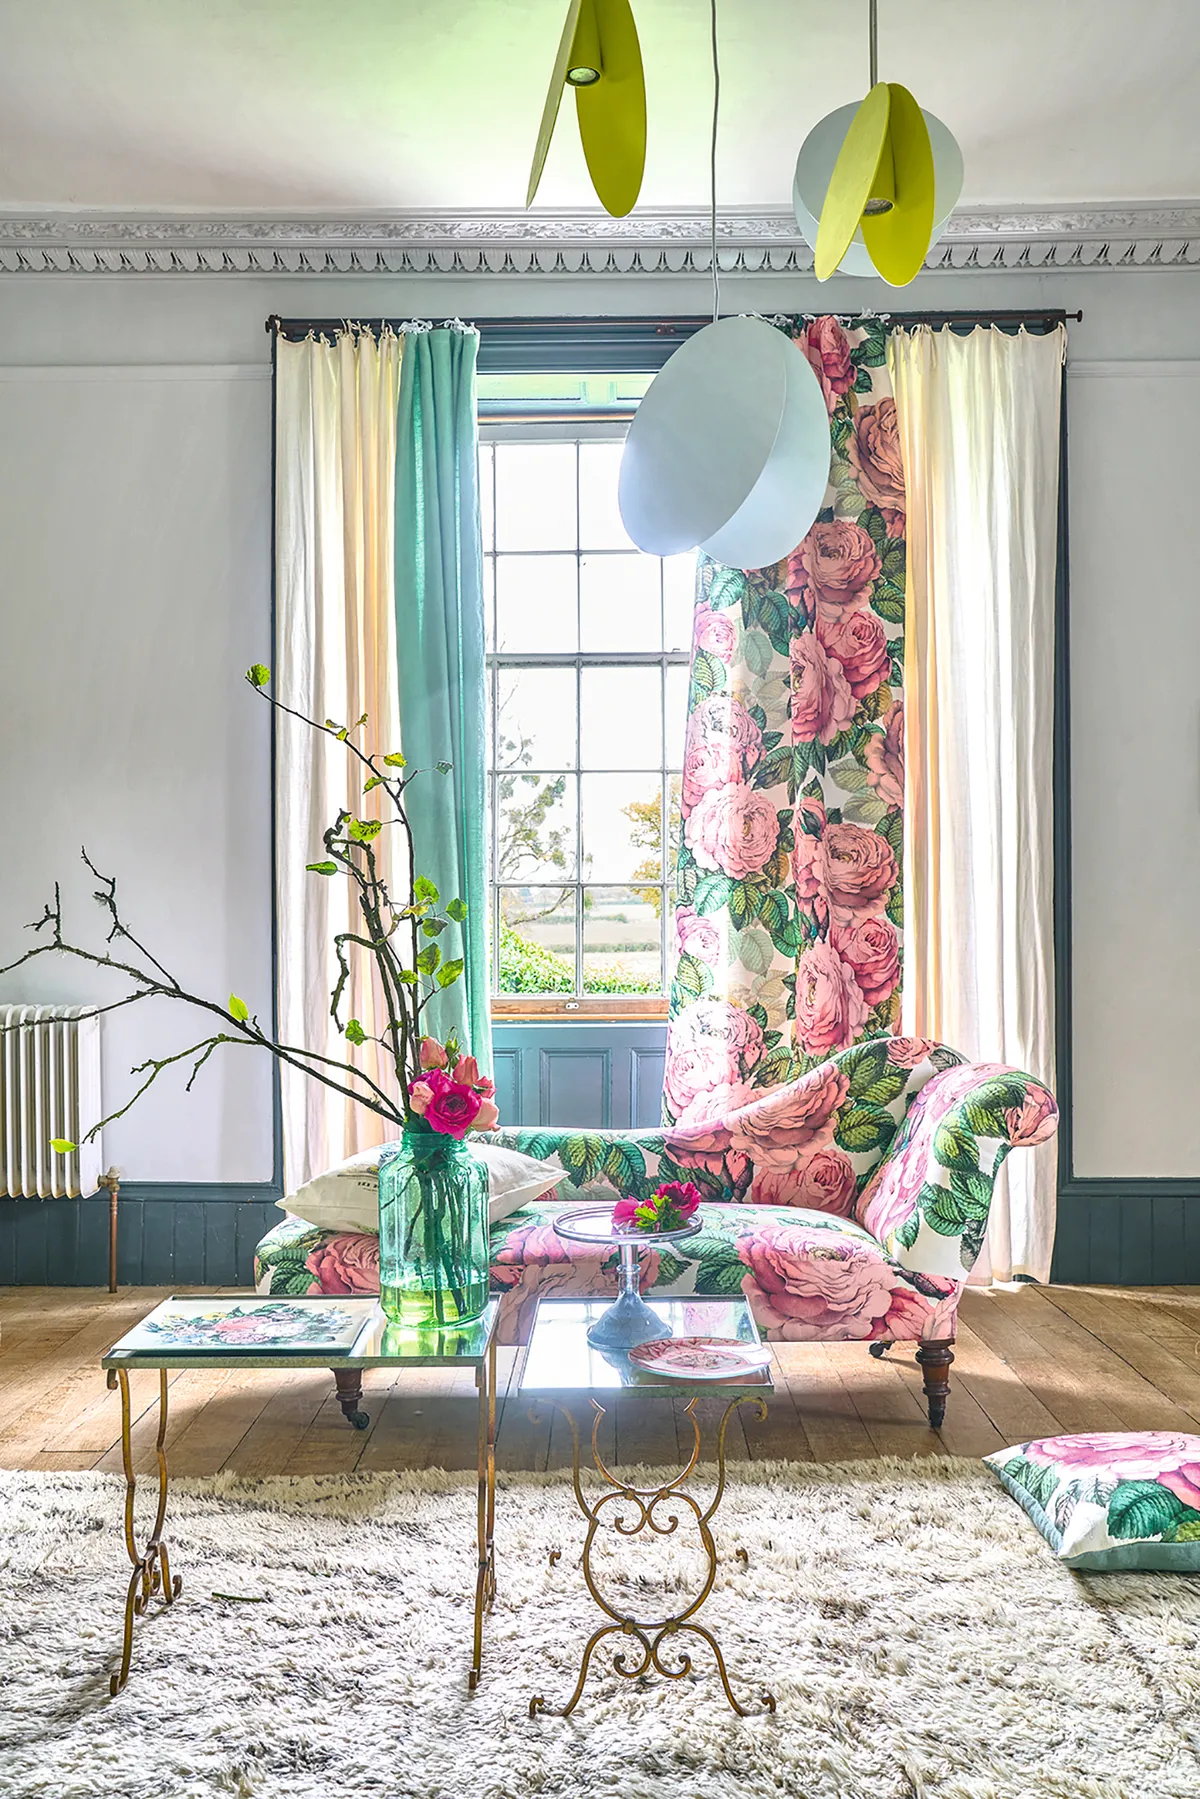 An elegant chaise upholstered in bold pink and green floral fabric.